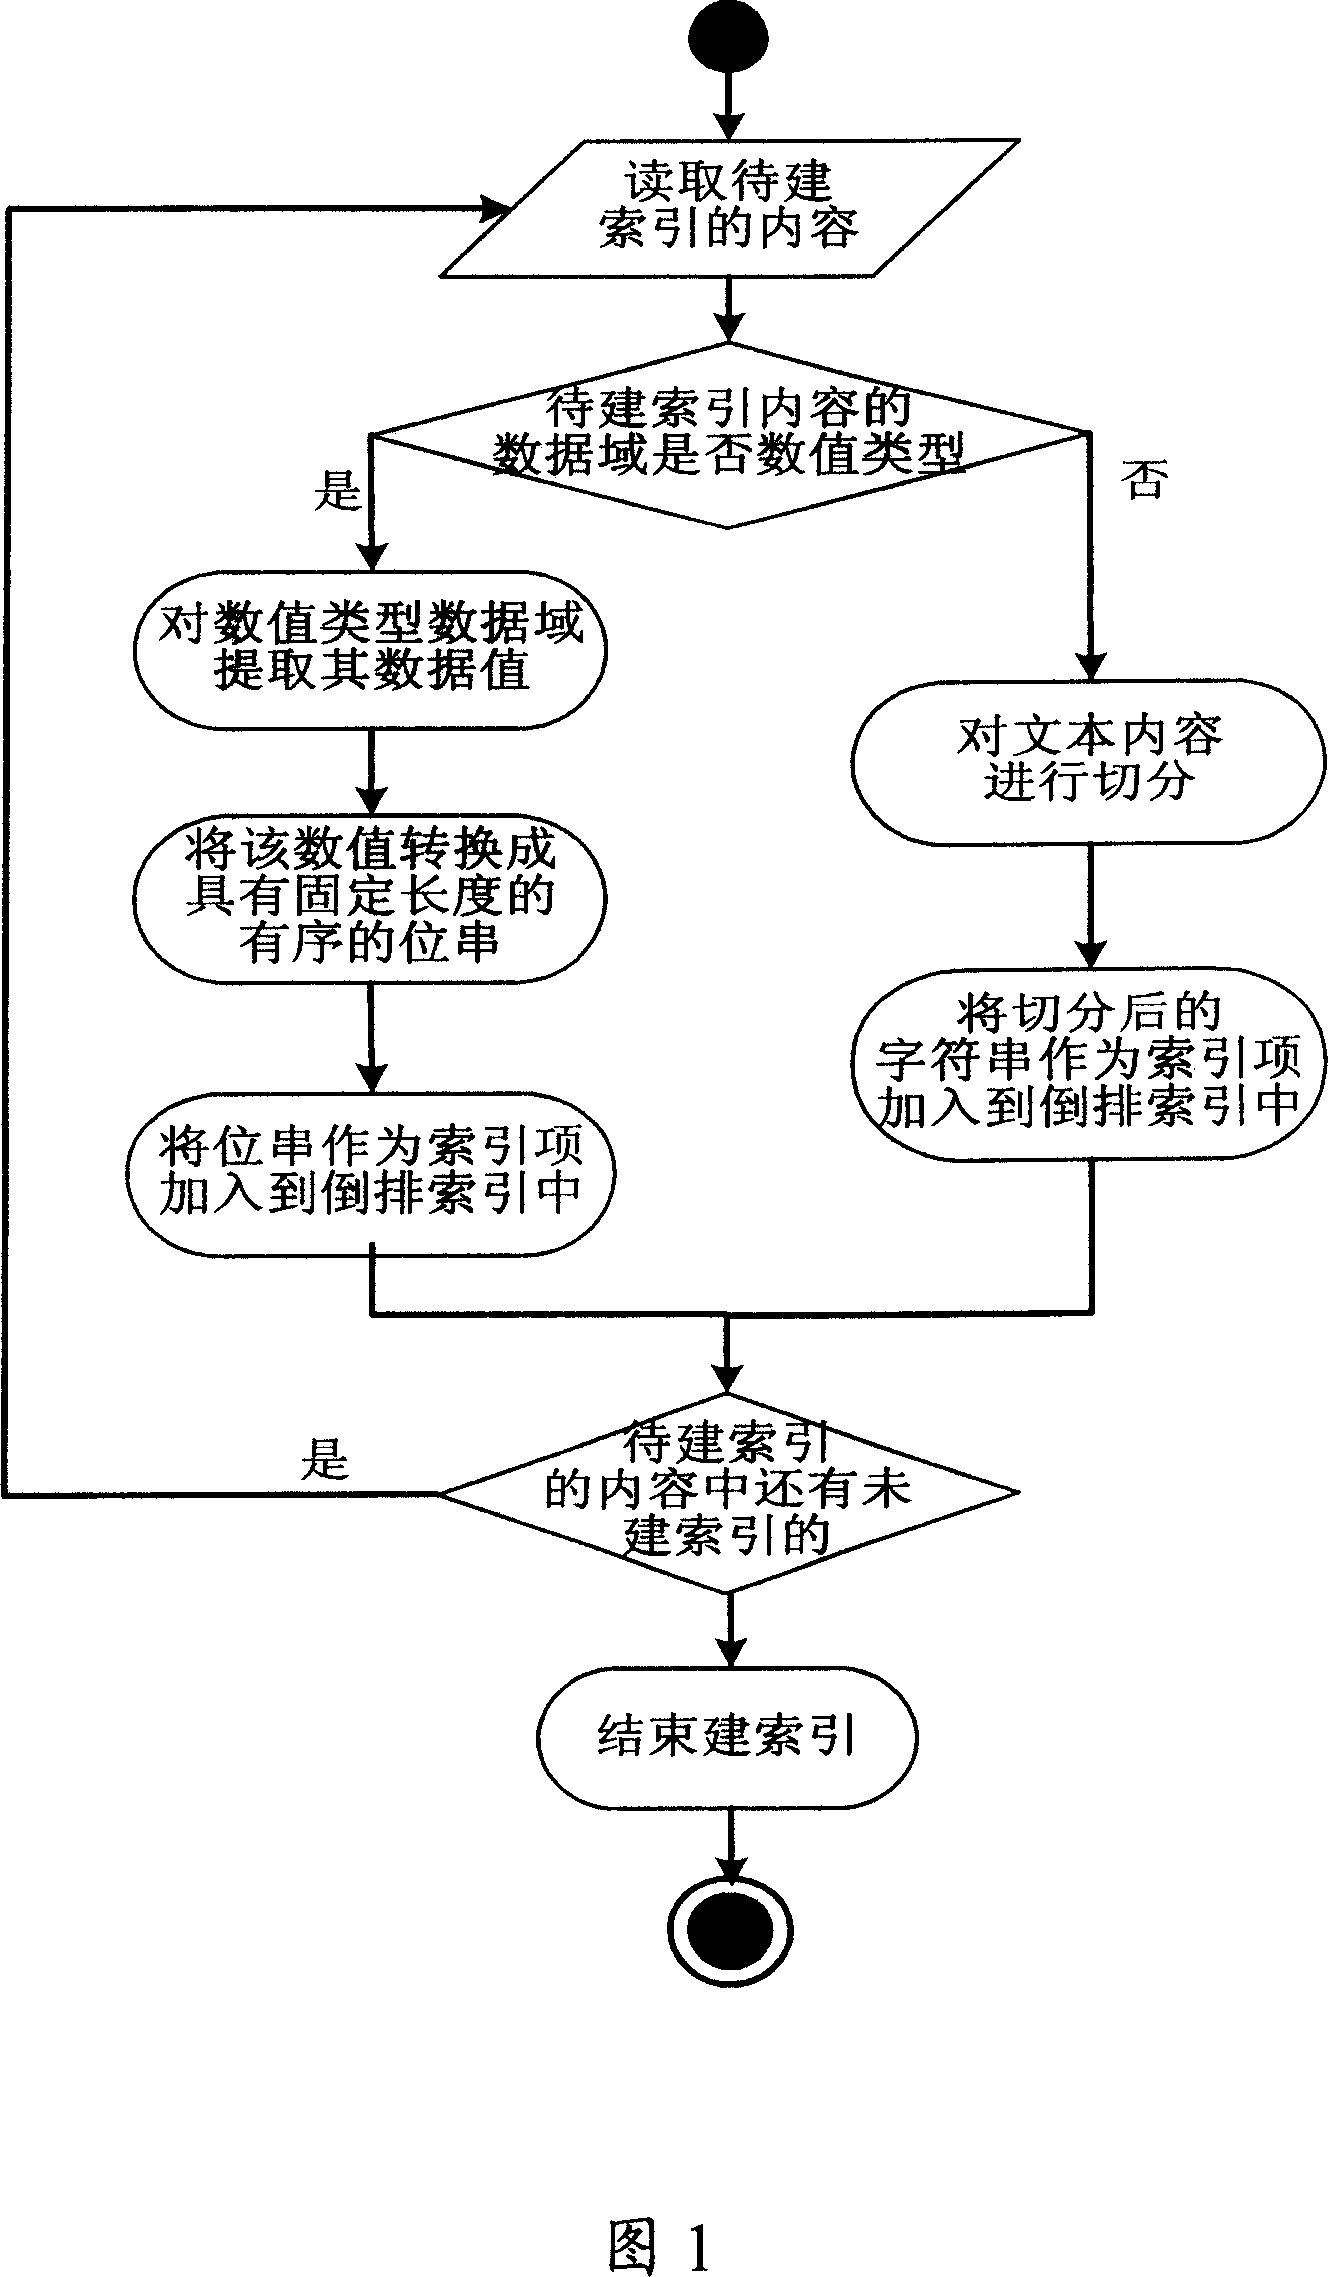 Method for supporting full text retrieval system, and searching numerical value categorical data domain meanwhile